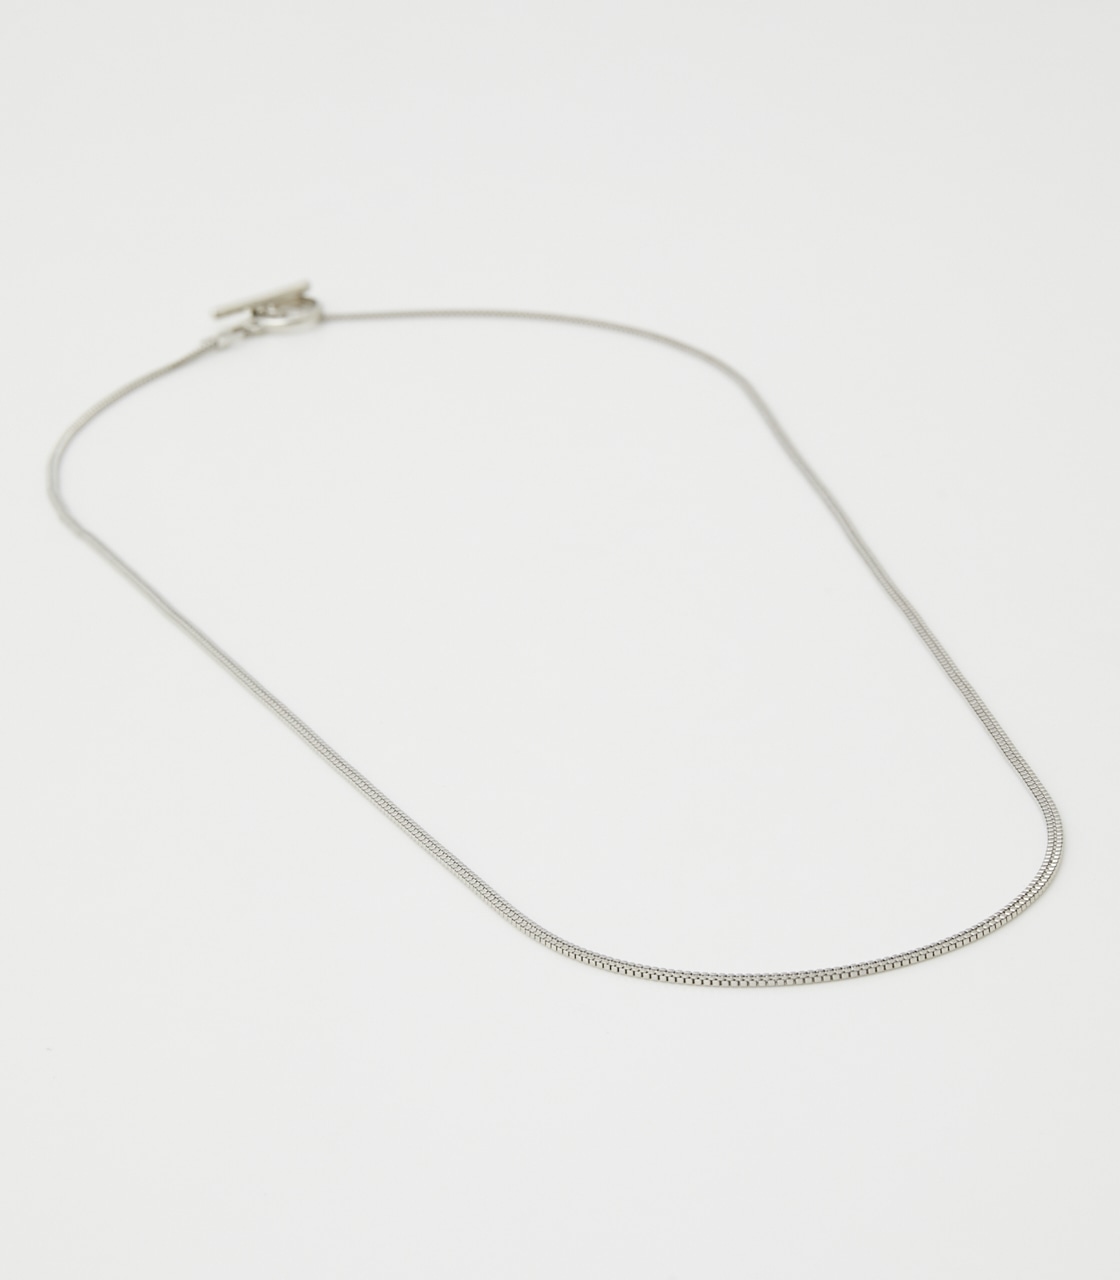 SIMPLE CHAIN NECKLACE/シンプルチェーンネックレス 詳細画像 Multi_2 2